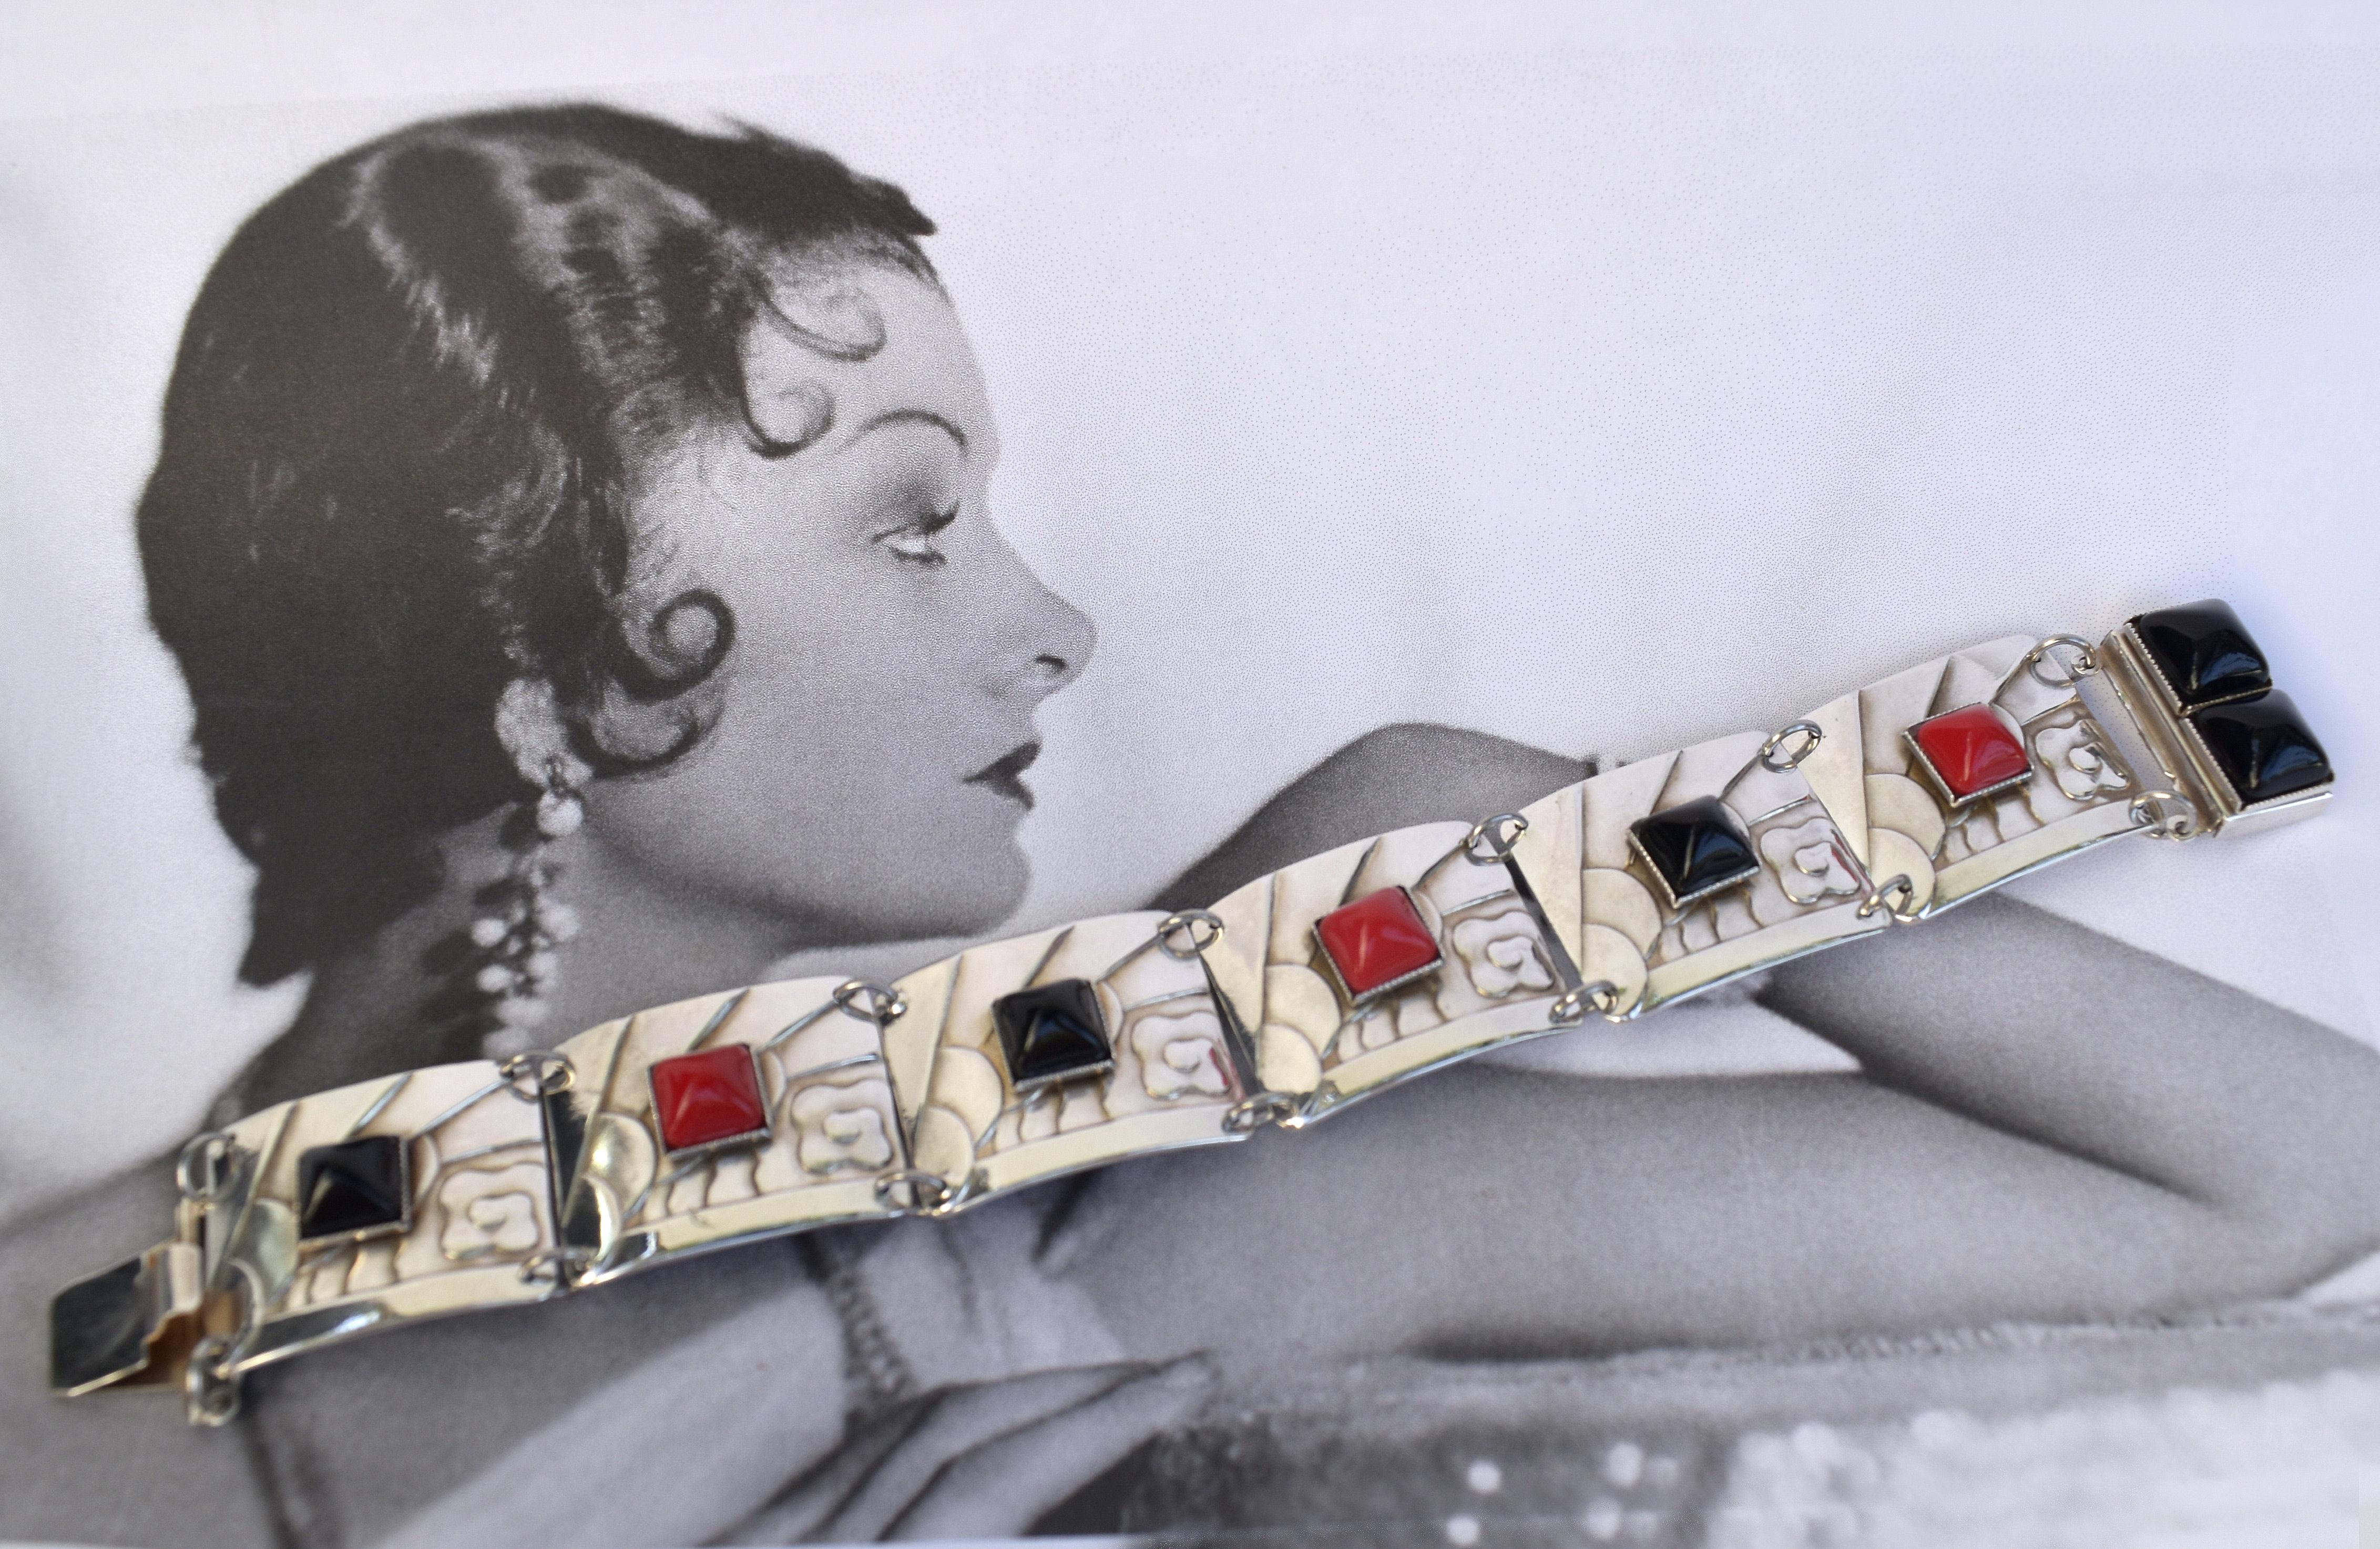 A real Art Deco classic and very high quality ladies Art Deco Modernist bracelet. Features a red and black alternate stones which are mounted on silver plated linked panels which are embossed with geometric lines, clouds etc... it just screams Art